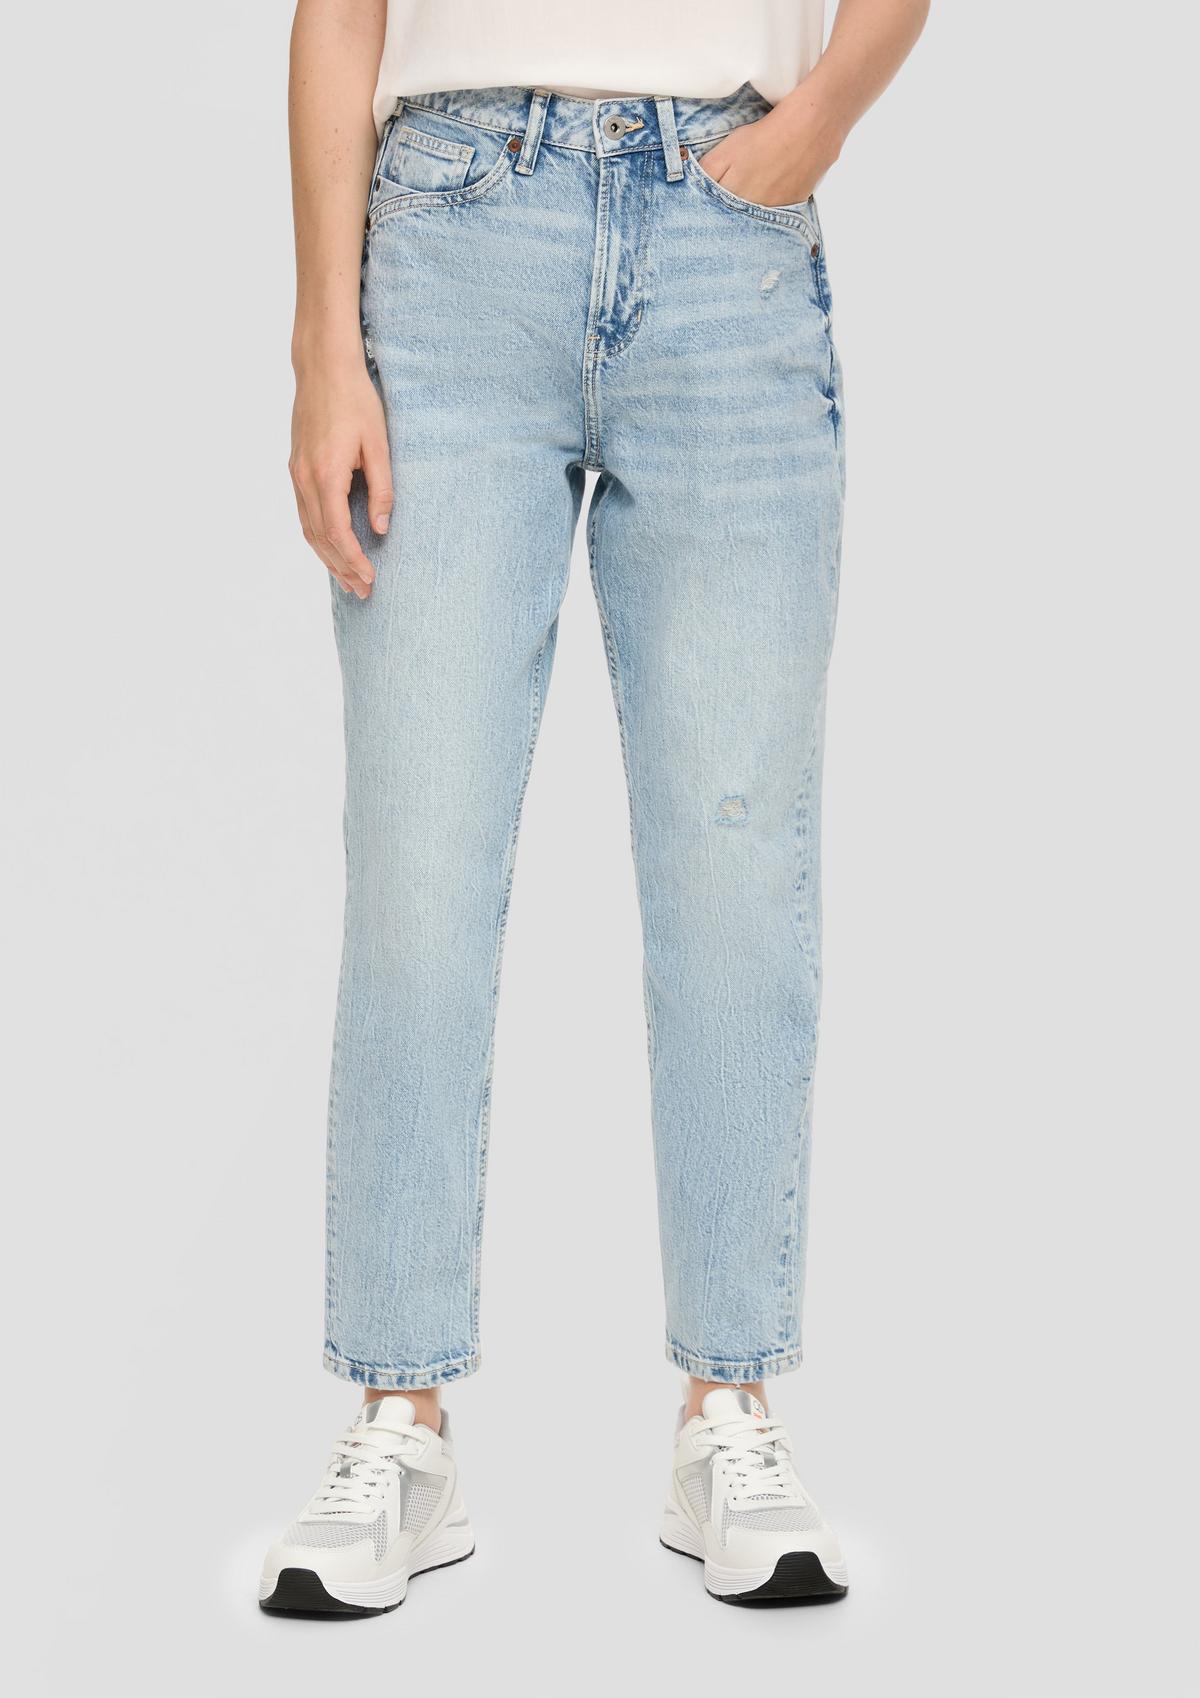 s.Oliver Enkellange mom jeans / relaxed fit / high rise / tapered leg